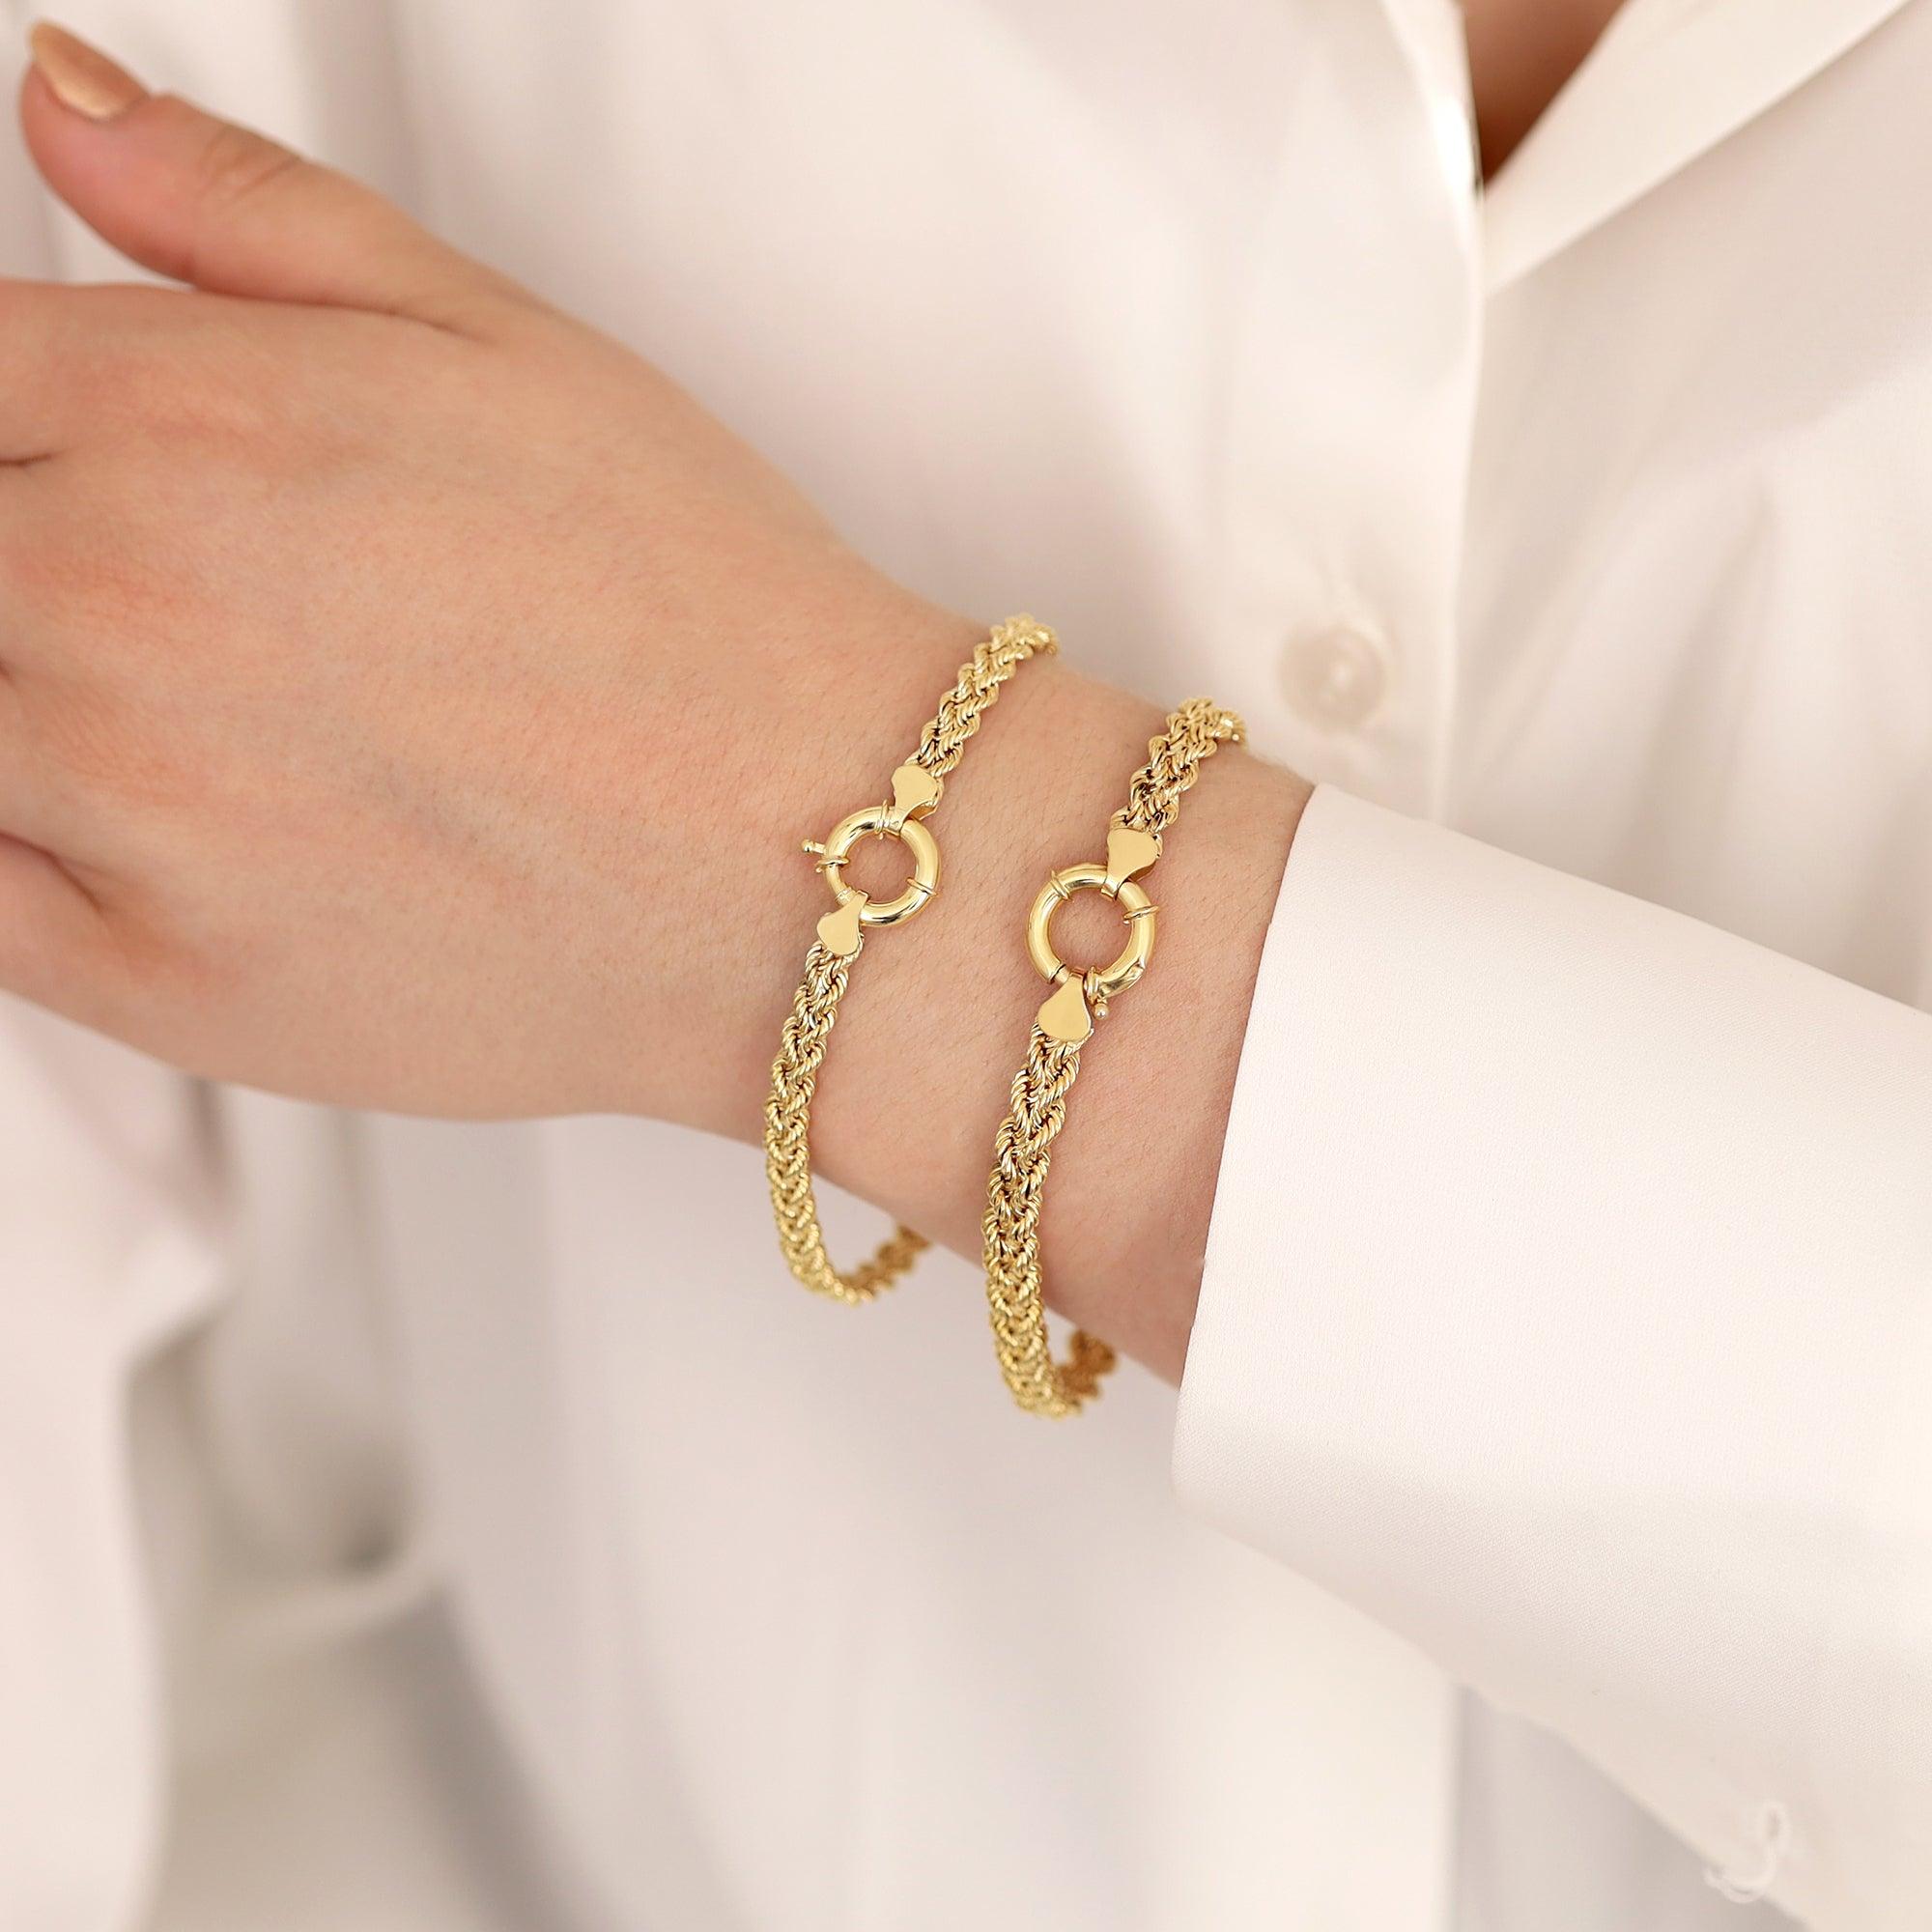 14k Gold Rope Chain Bracelet with Sailor Lock Clasp - DionJewel